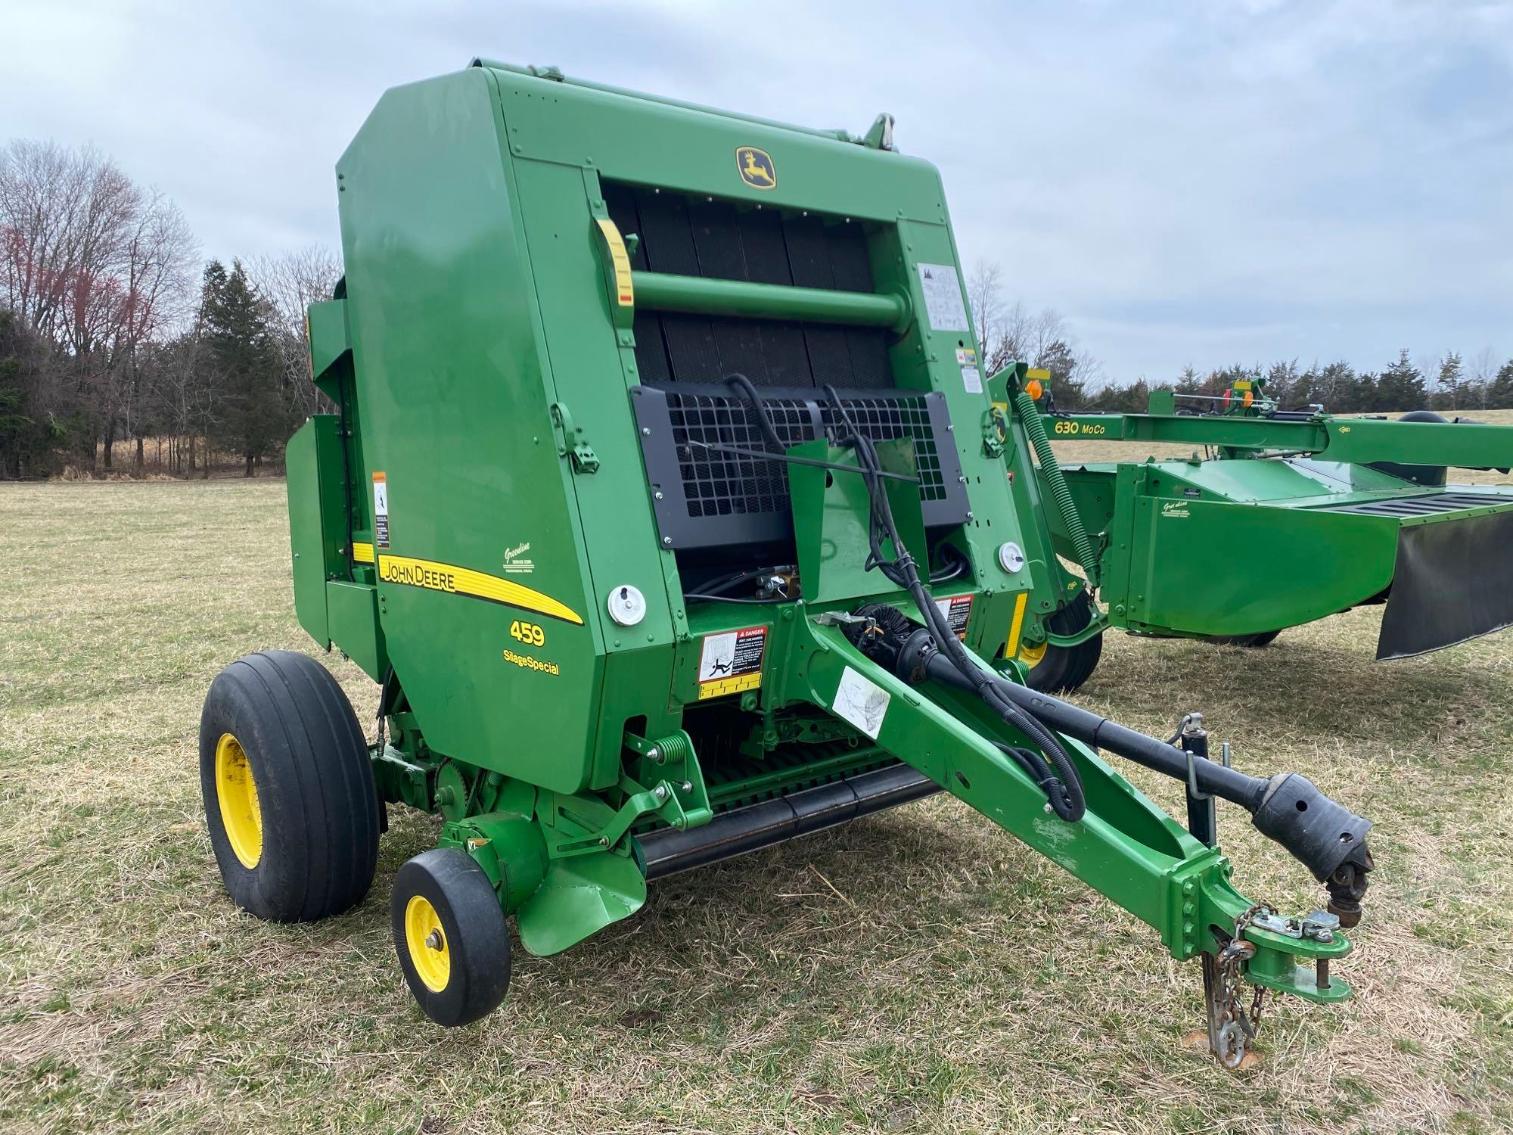 Image for 2017 John Deere 459 Round Baler Silage Special w/Net Wrap & Monitor Approx. 5600 bales Ready to Work